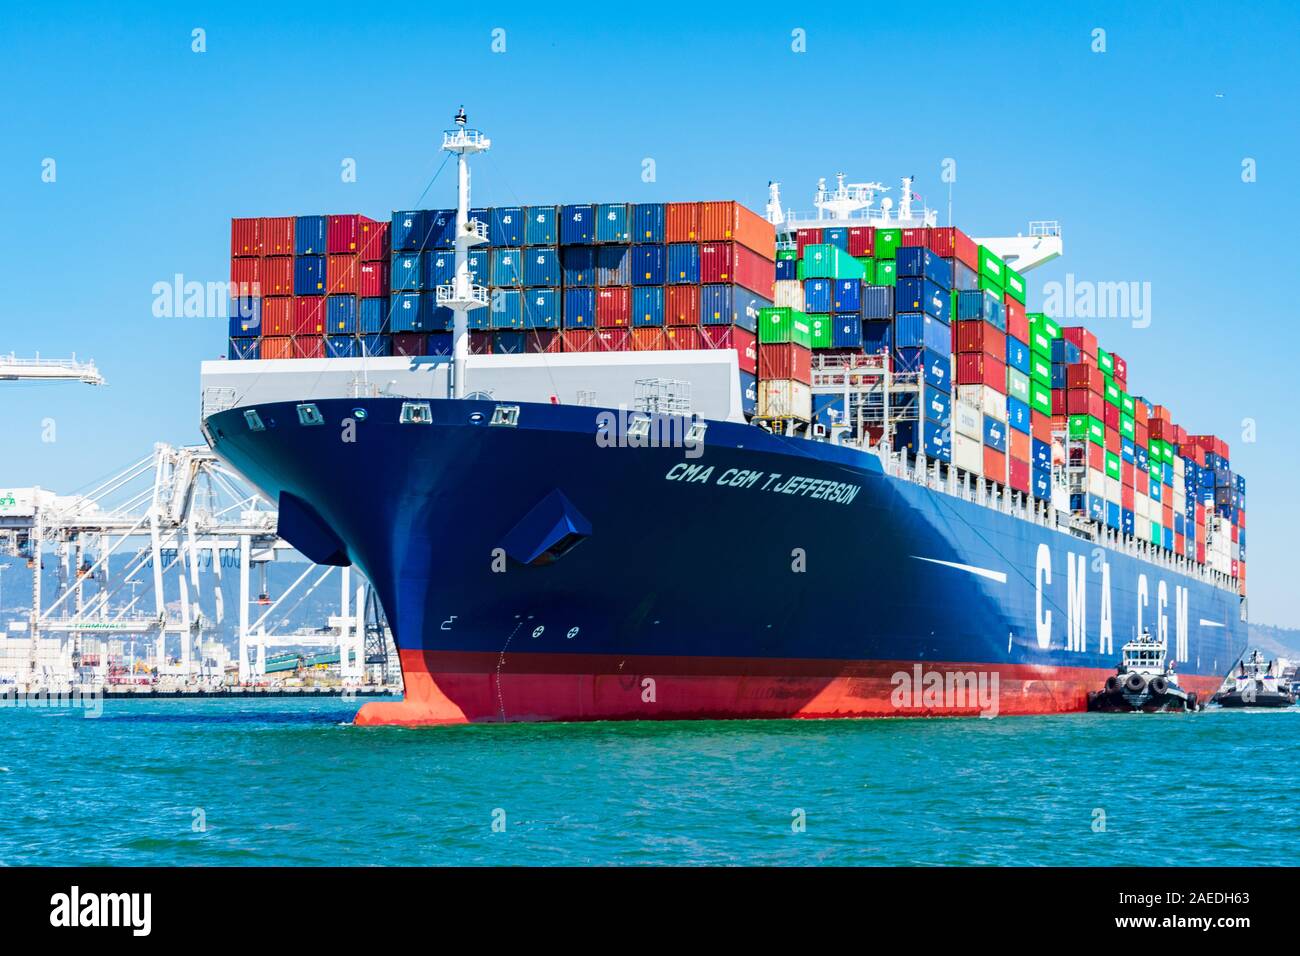 Tugboat assists container ship CMA CGM out of the Port of Oakland under blue sky. A tugboat maneuvers vessel by pushing, pulling or towing containersh Stock Photo